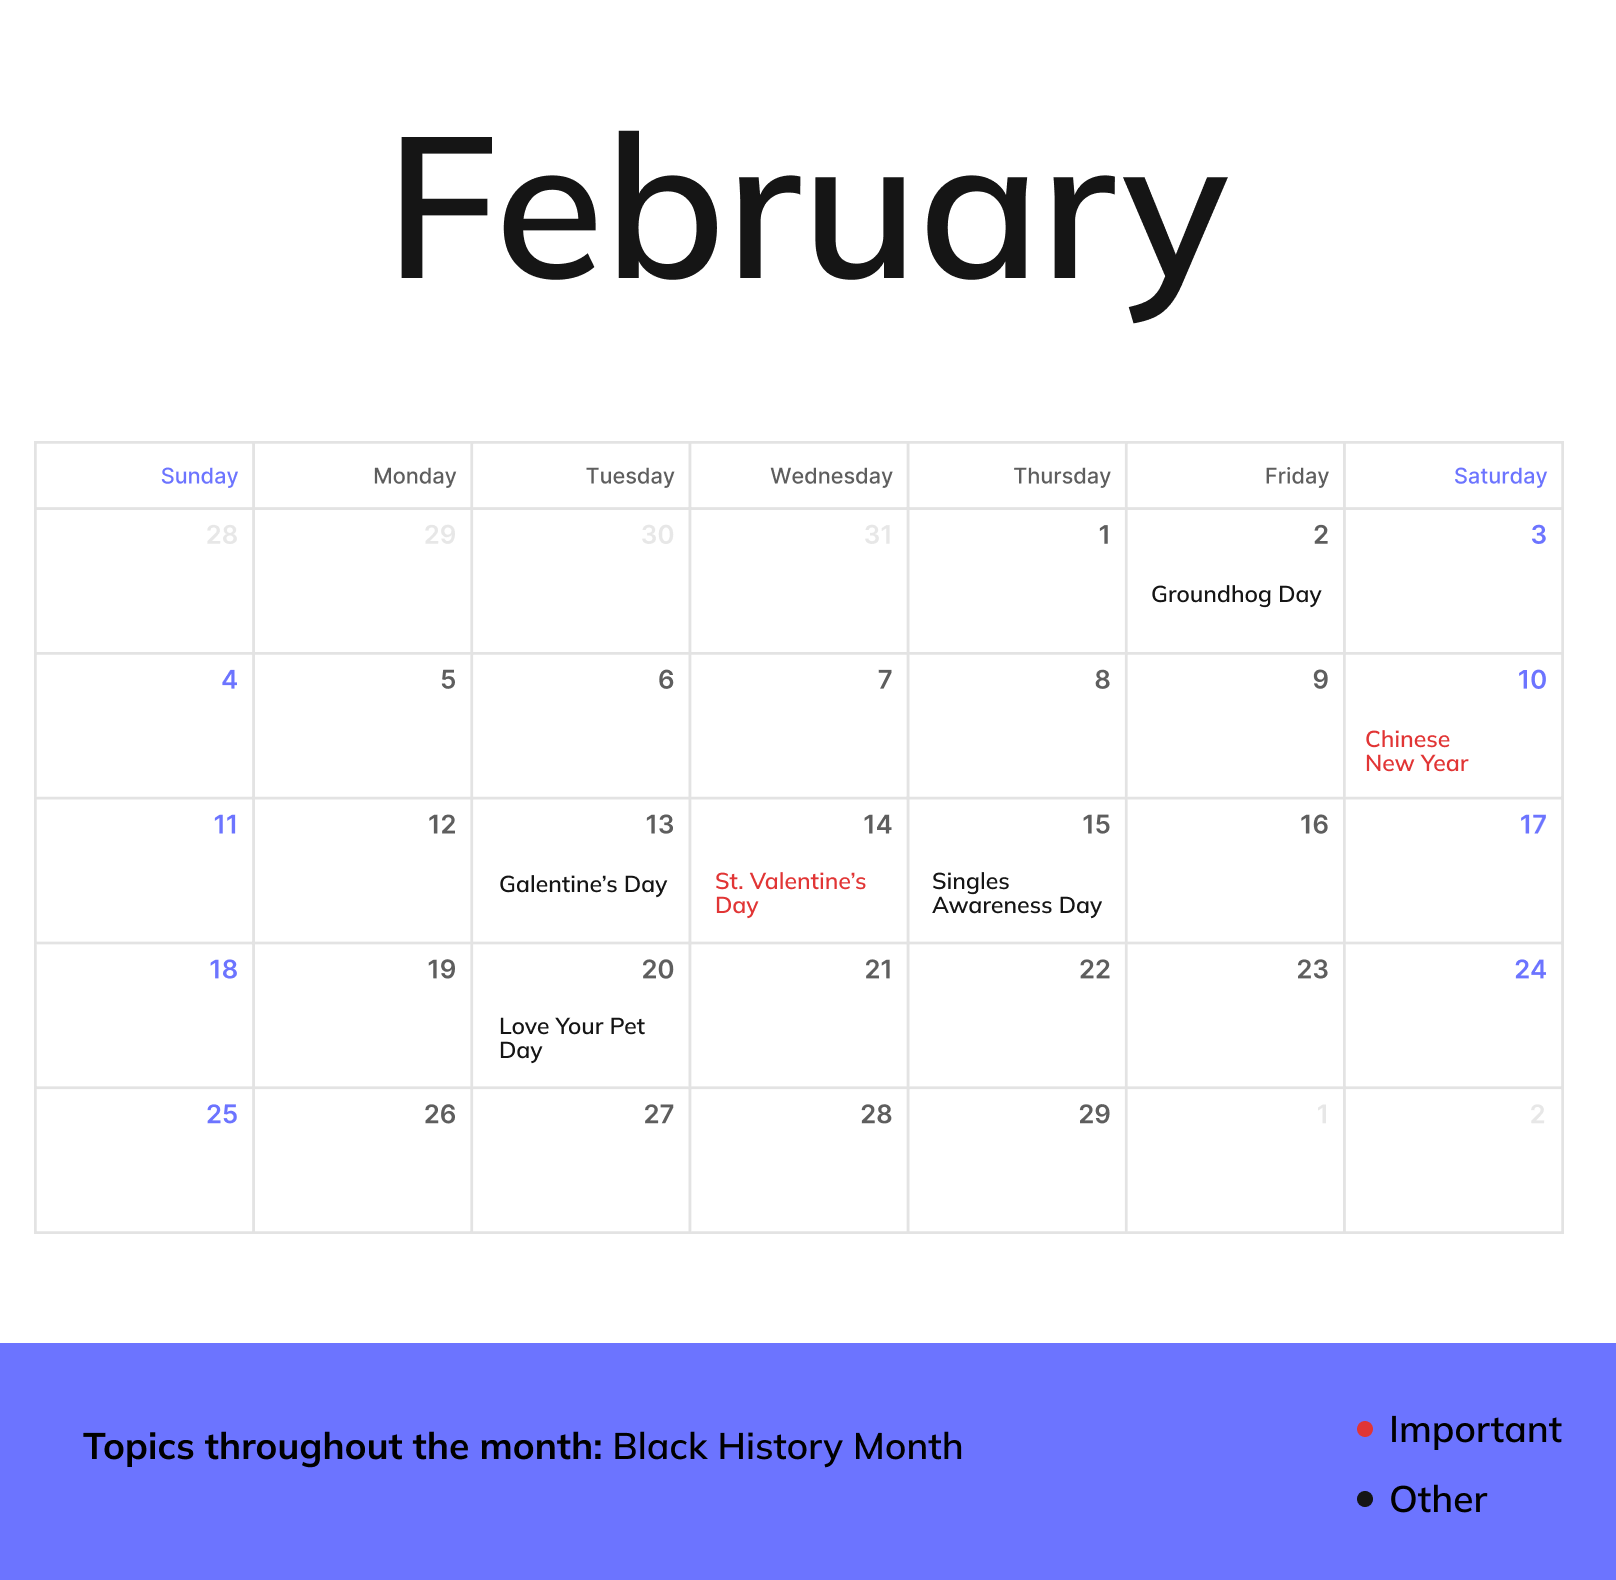 A February monthly calendar with holidays and topics throughout the month being Black History Month